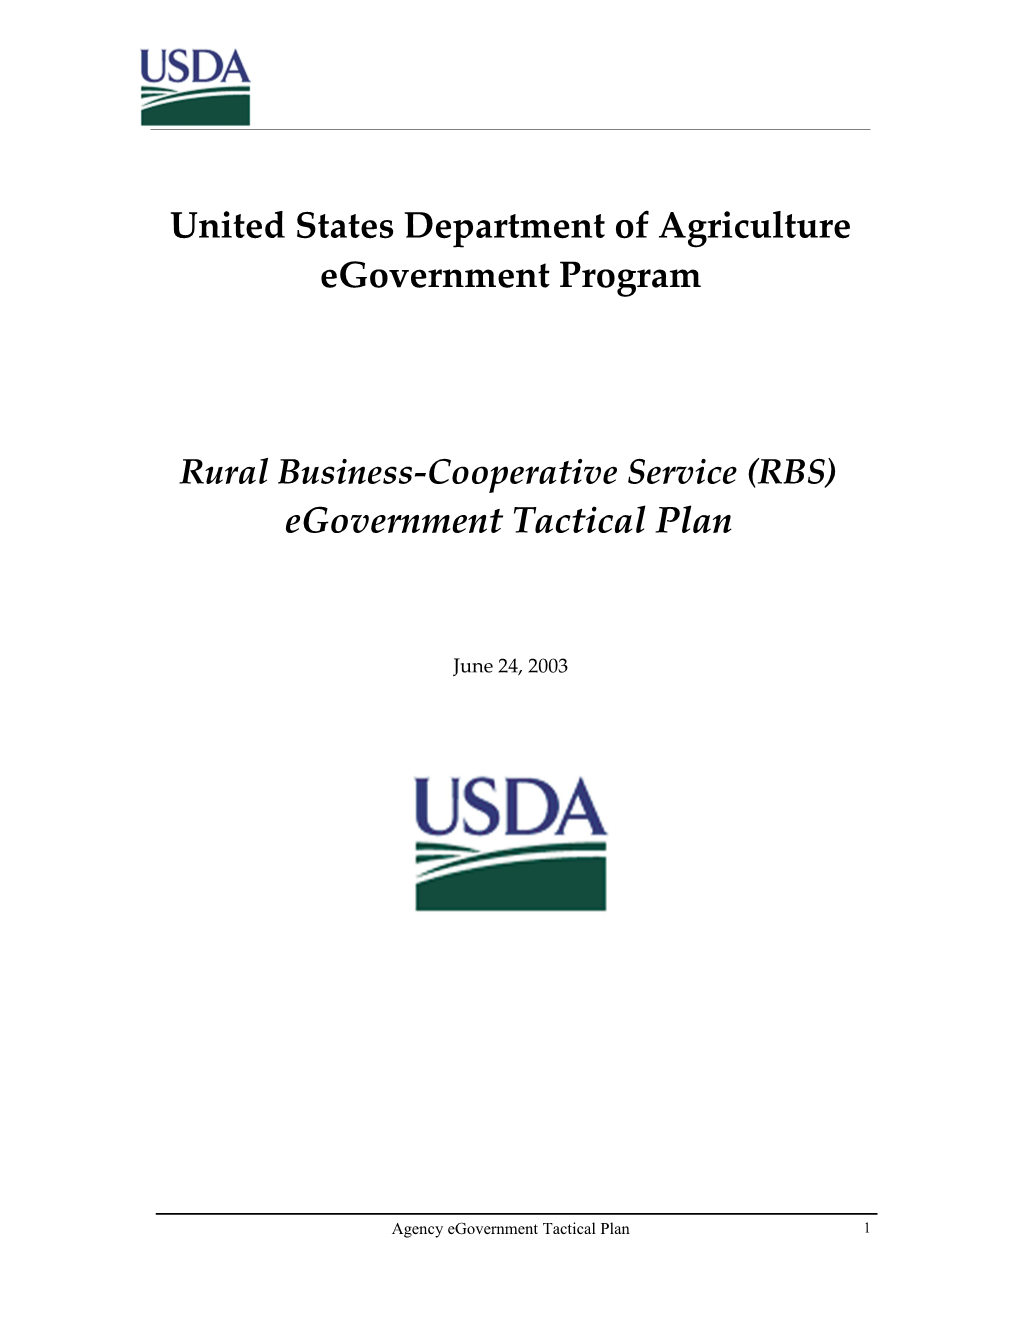 United States Department of Agriculture Egovernment Program s1